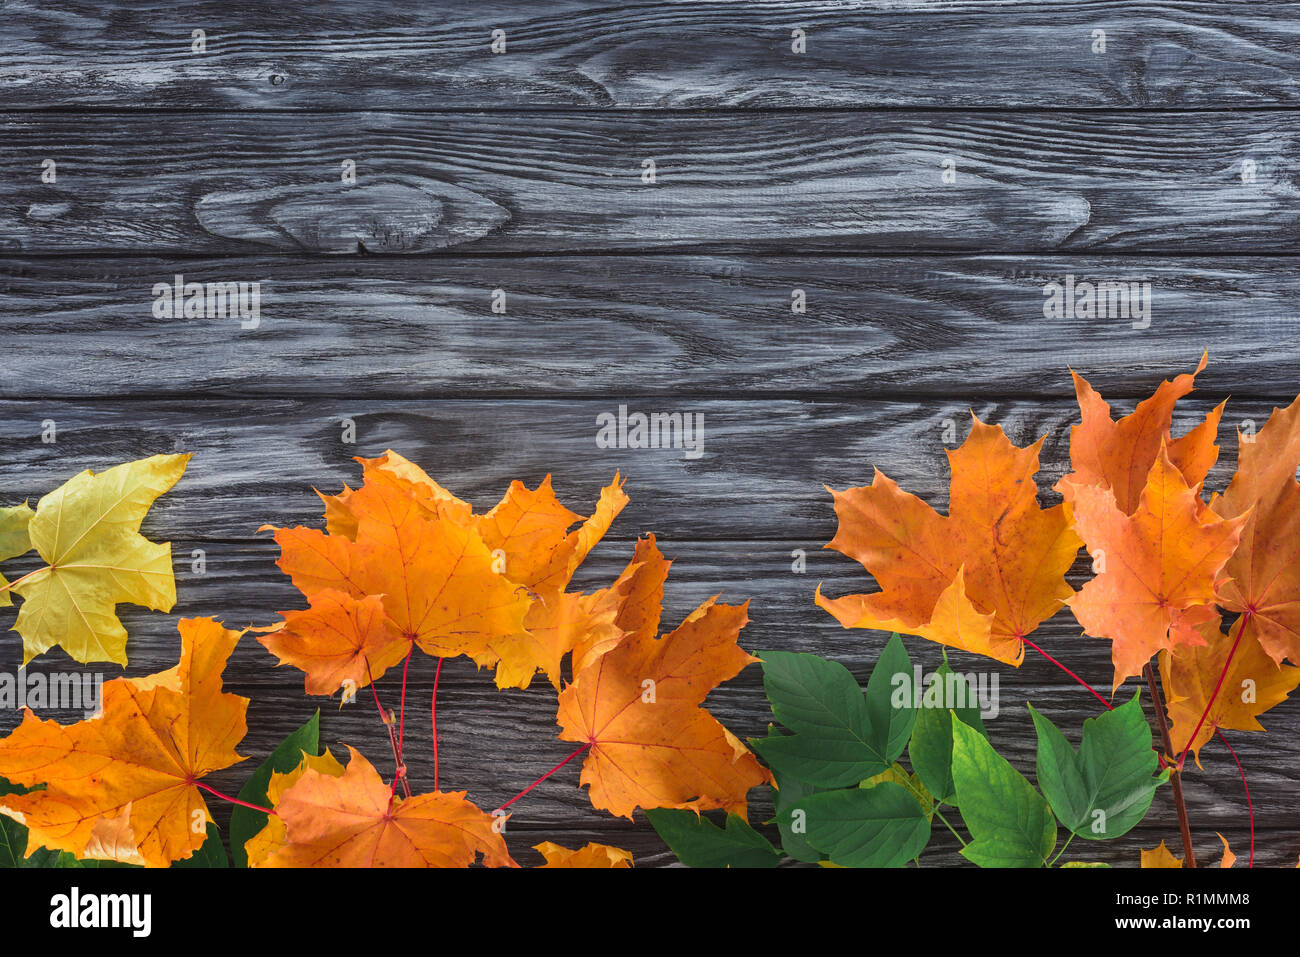 top view of orange and green autumnal maple leaves on wooden surface Stock Photo